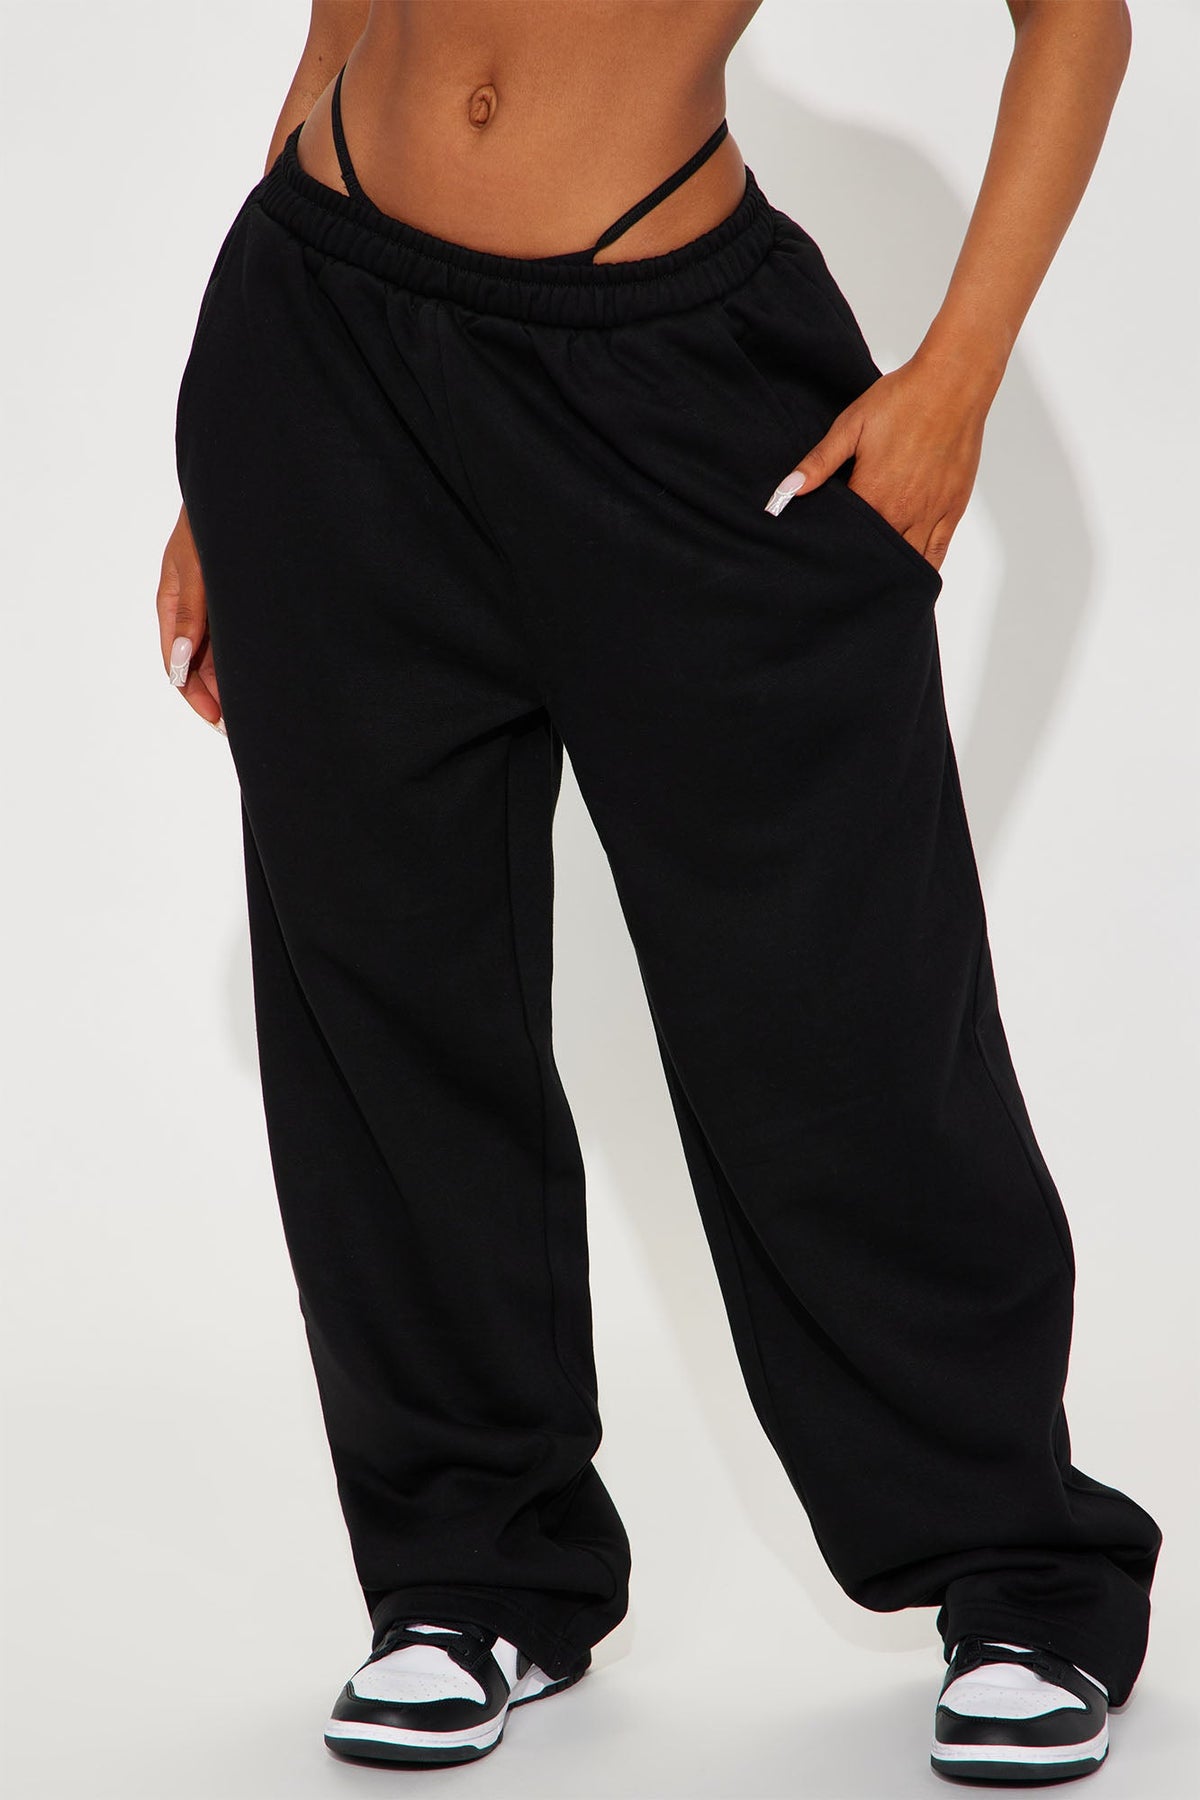 Too Chill Lounge Pant - Black